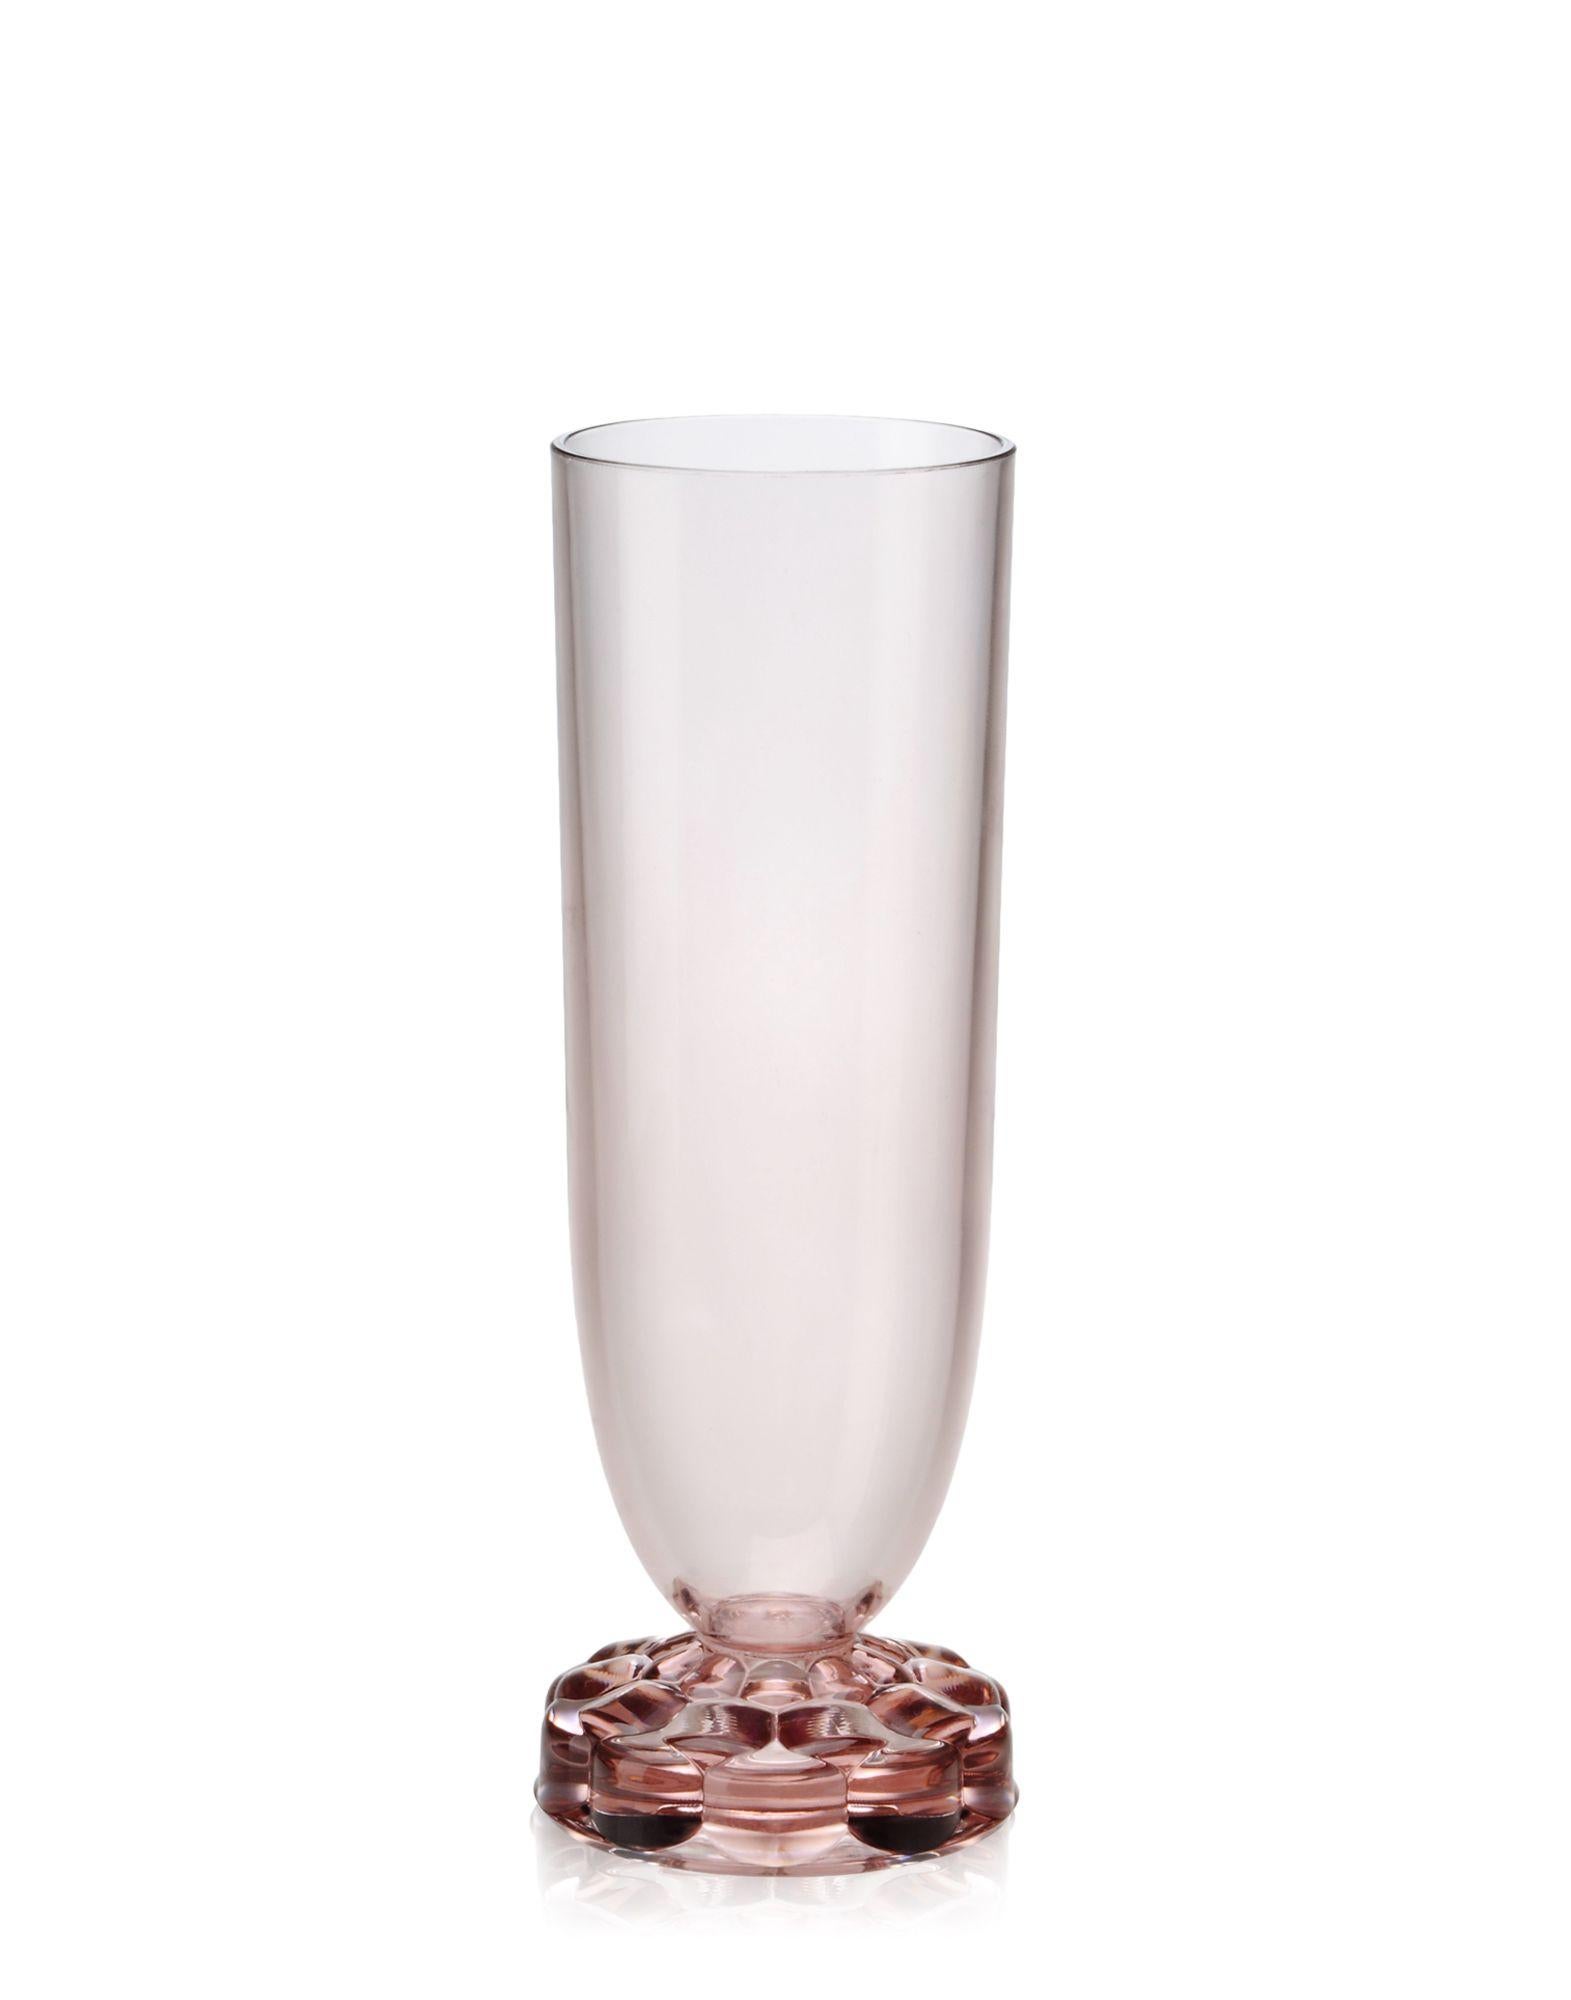 The Jellies family tableware line has been expanded to include new items designed especially for the Christmas holidays and for ringing in the new year, the Jellies champagne flute.

Dimensions: Height 6.75 in.; Diameter 2.13 in.; Unit weight: